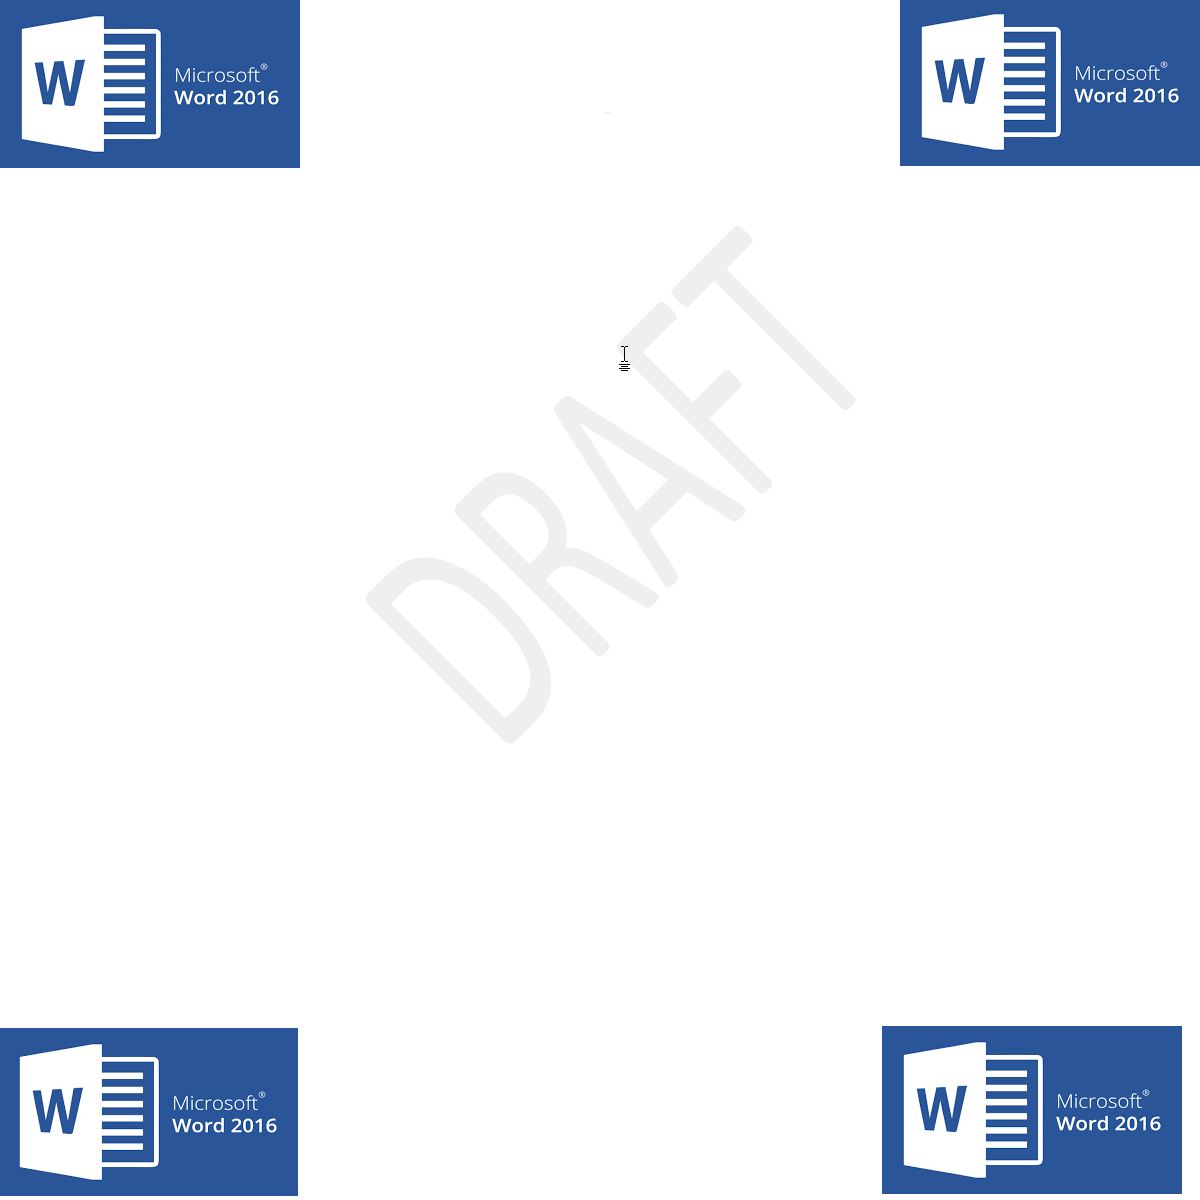 Word 2016 Logo - Can't remove watermark in Microsoft Word? Here is the solution